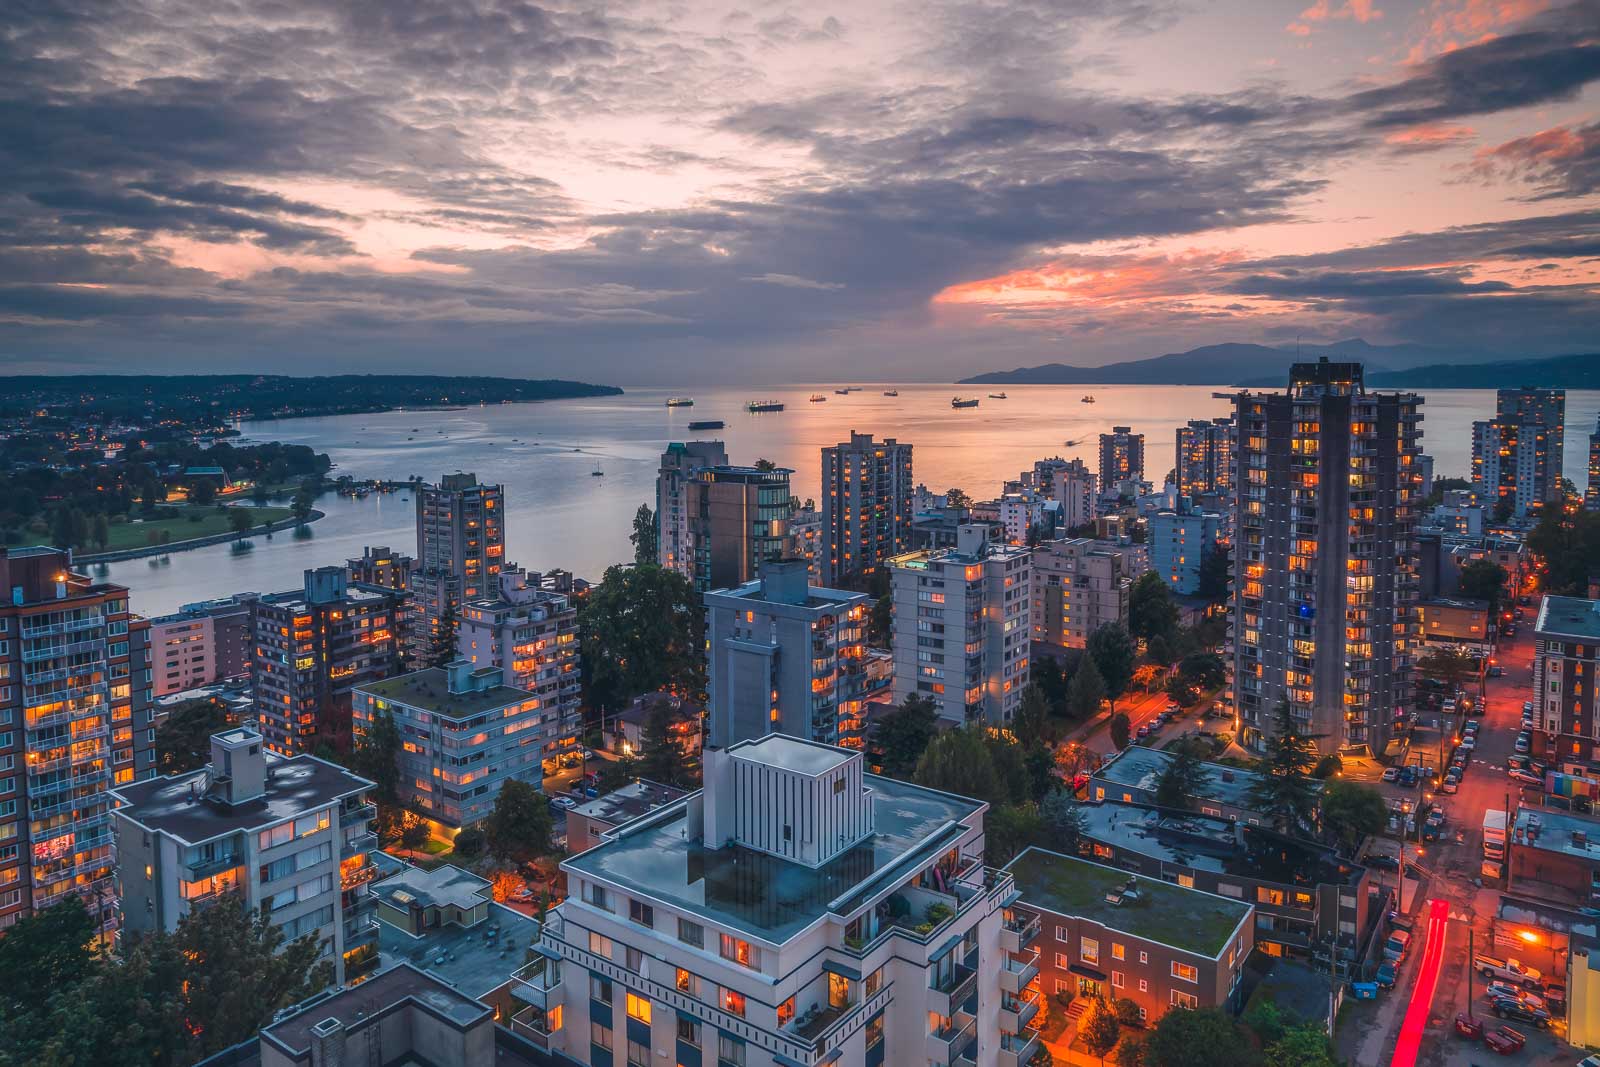 THE 10 BEST Things to Do Near Robson Street, Vancouver - Tripadvisor